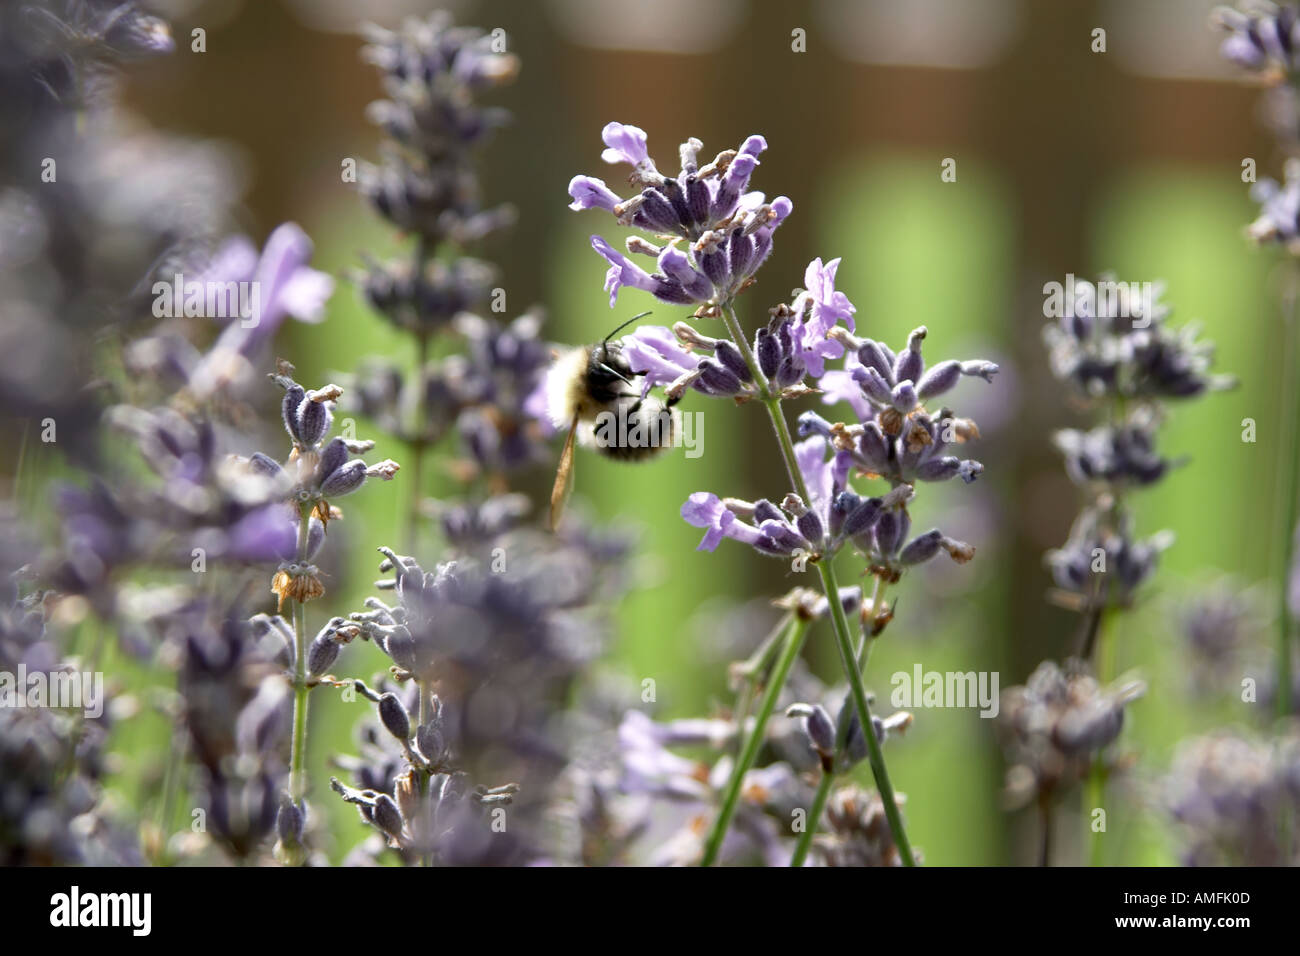 landscape shot of lavender plant in typical English countryside garden setting with bee collecting pollen Stock Photo